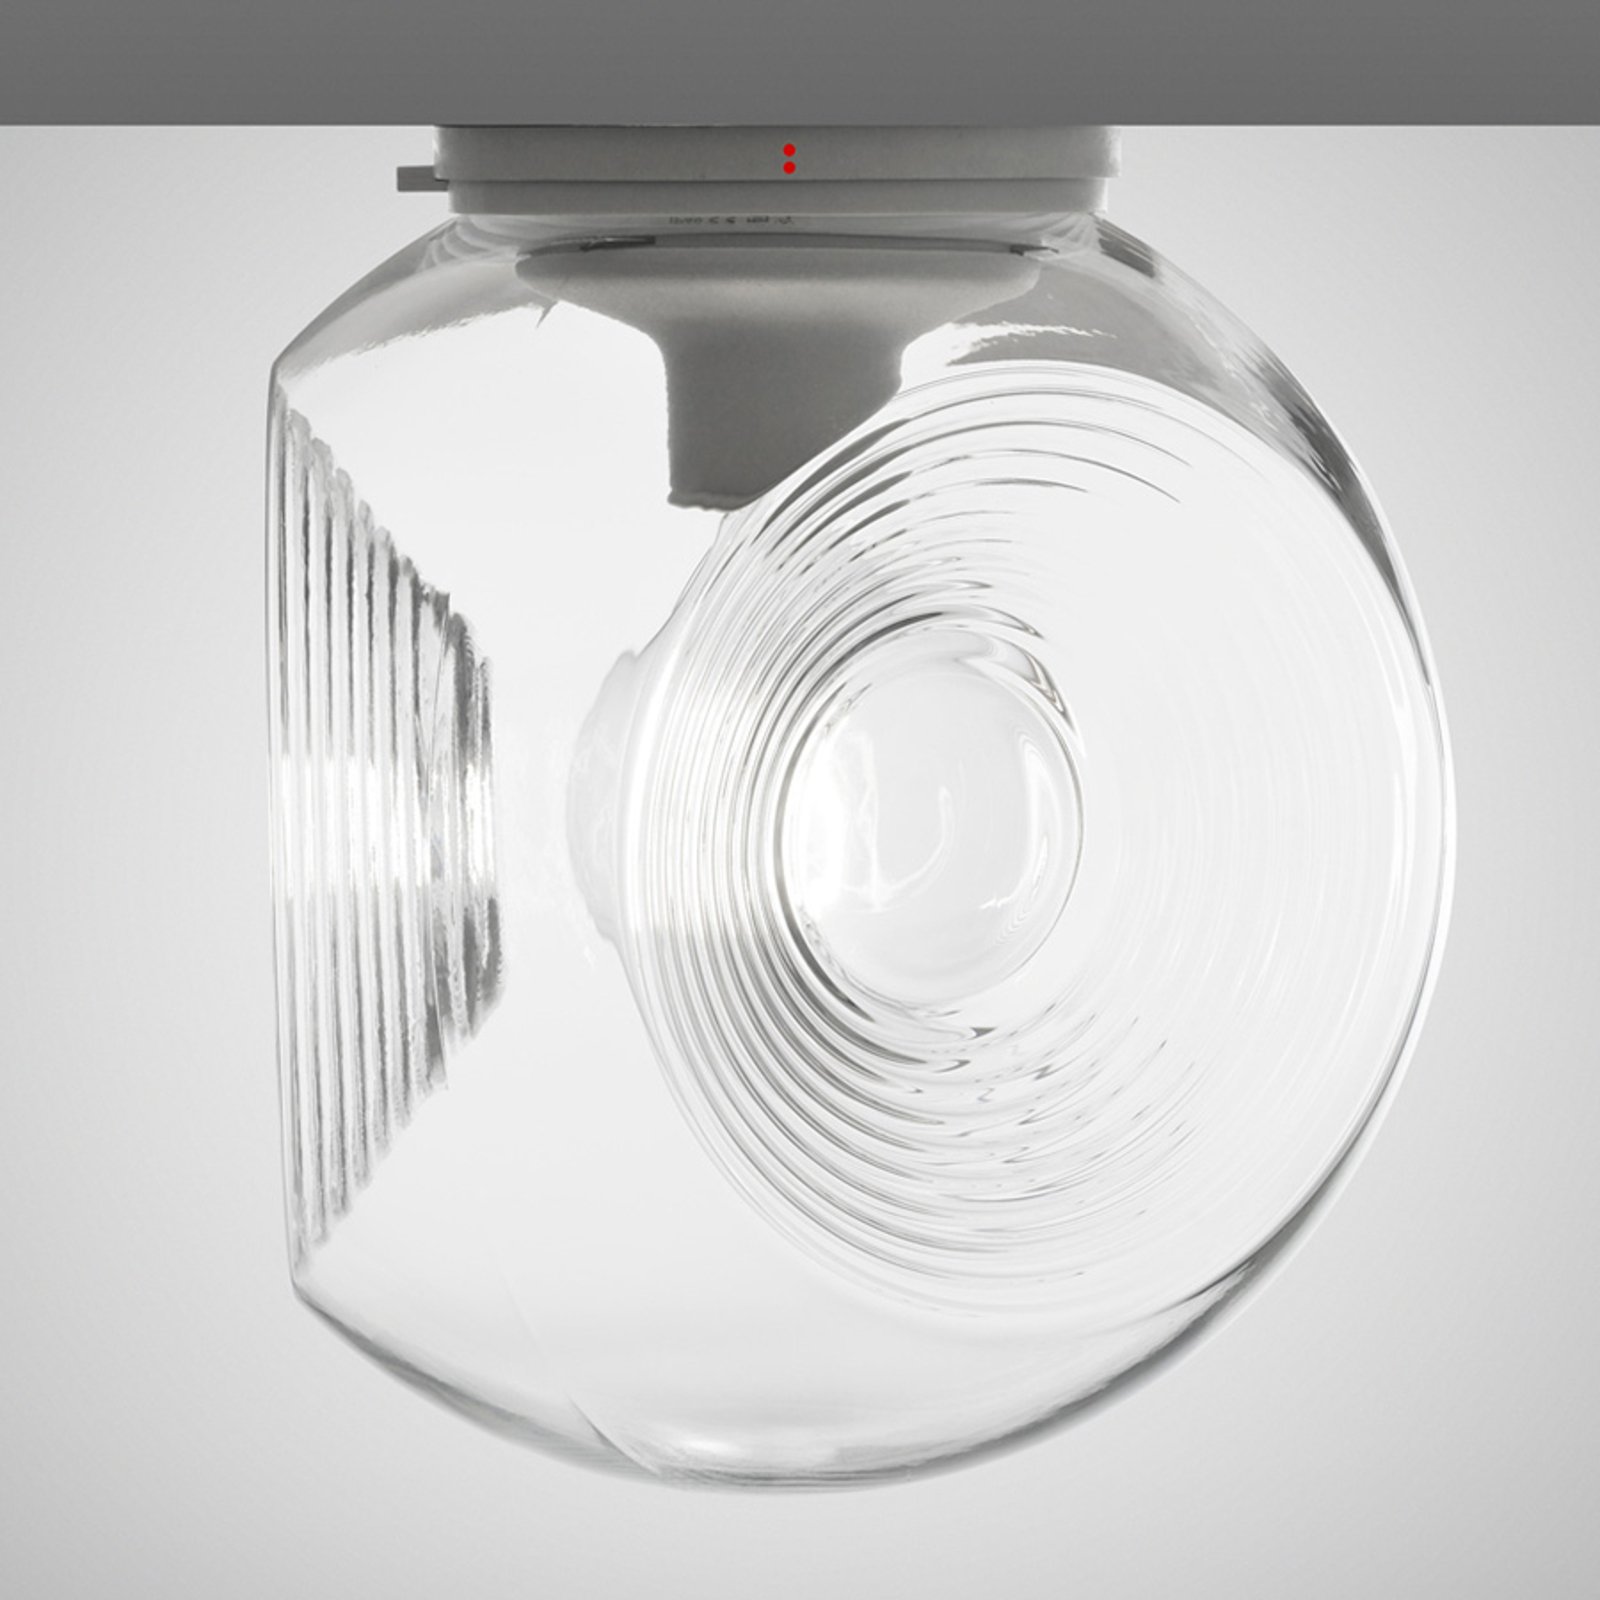 Eyes - glass ceiling light with clear diffuser